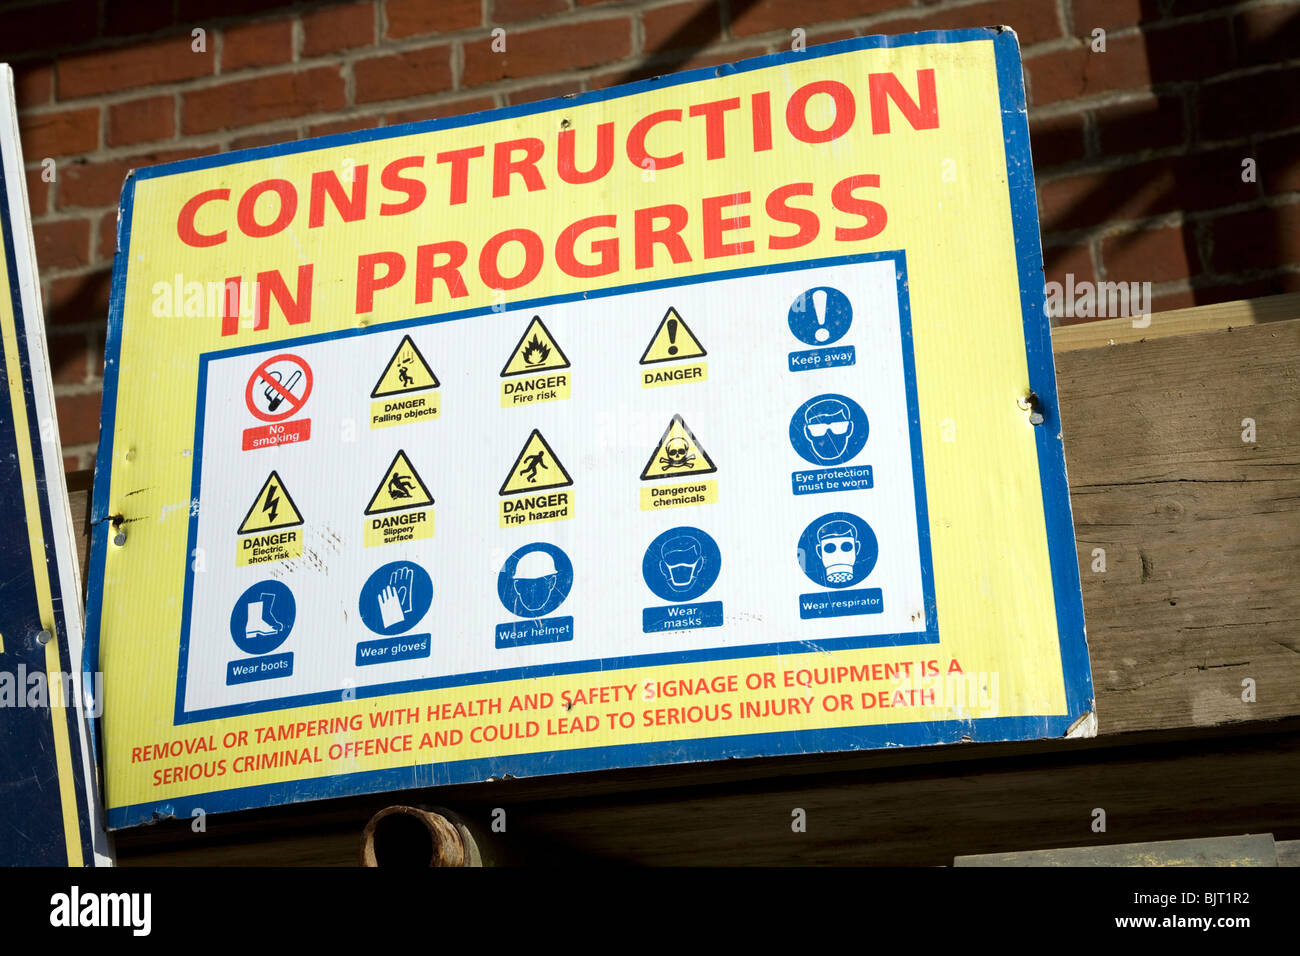 Construction in Progress health and safety notice sign Stock Photo